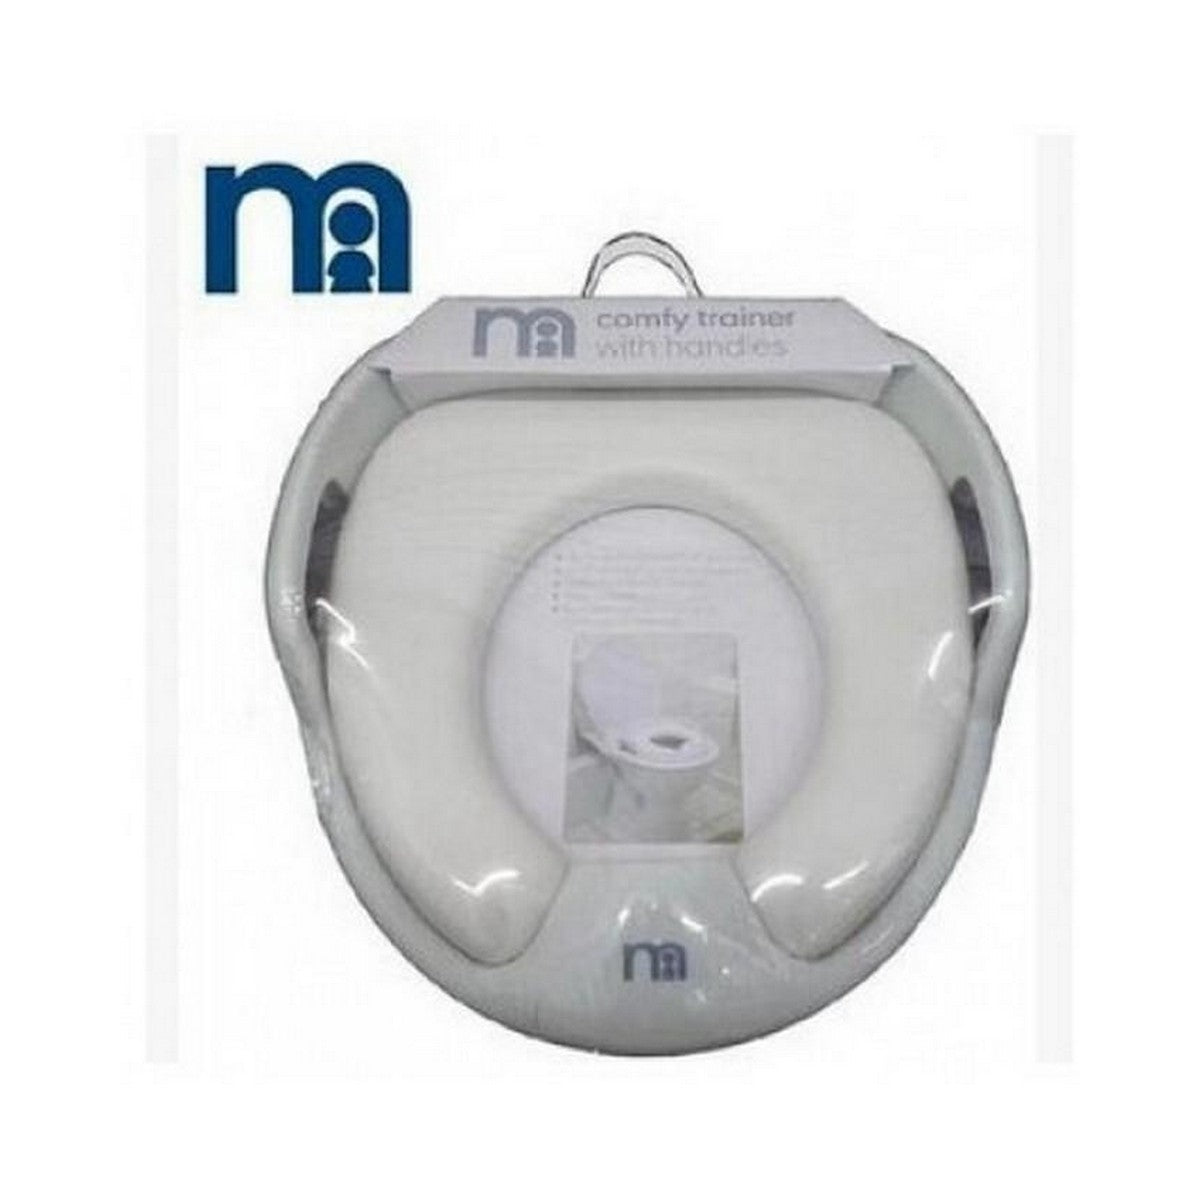 Mothercare commod seat / toilet seat